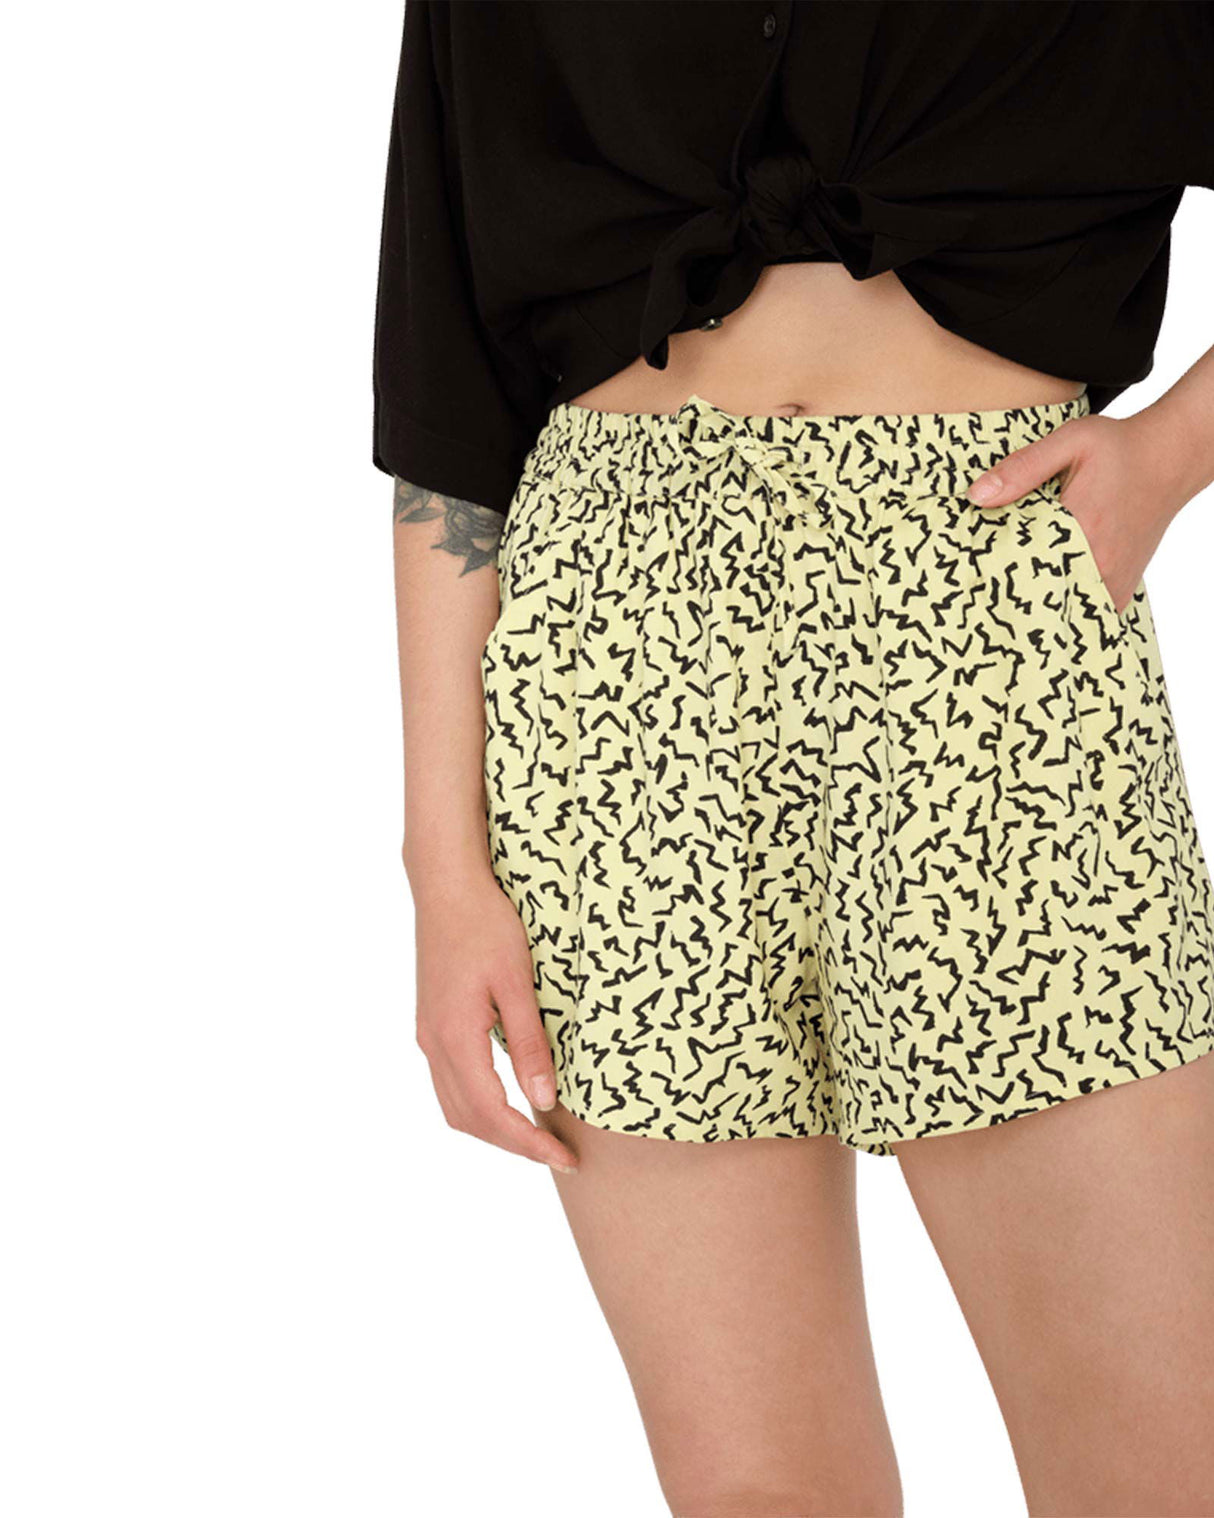 Volcom - Surfpunk Shorts | Aura Yellow -  - Married to the Sea Surf Shop - 